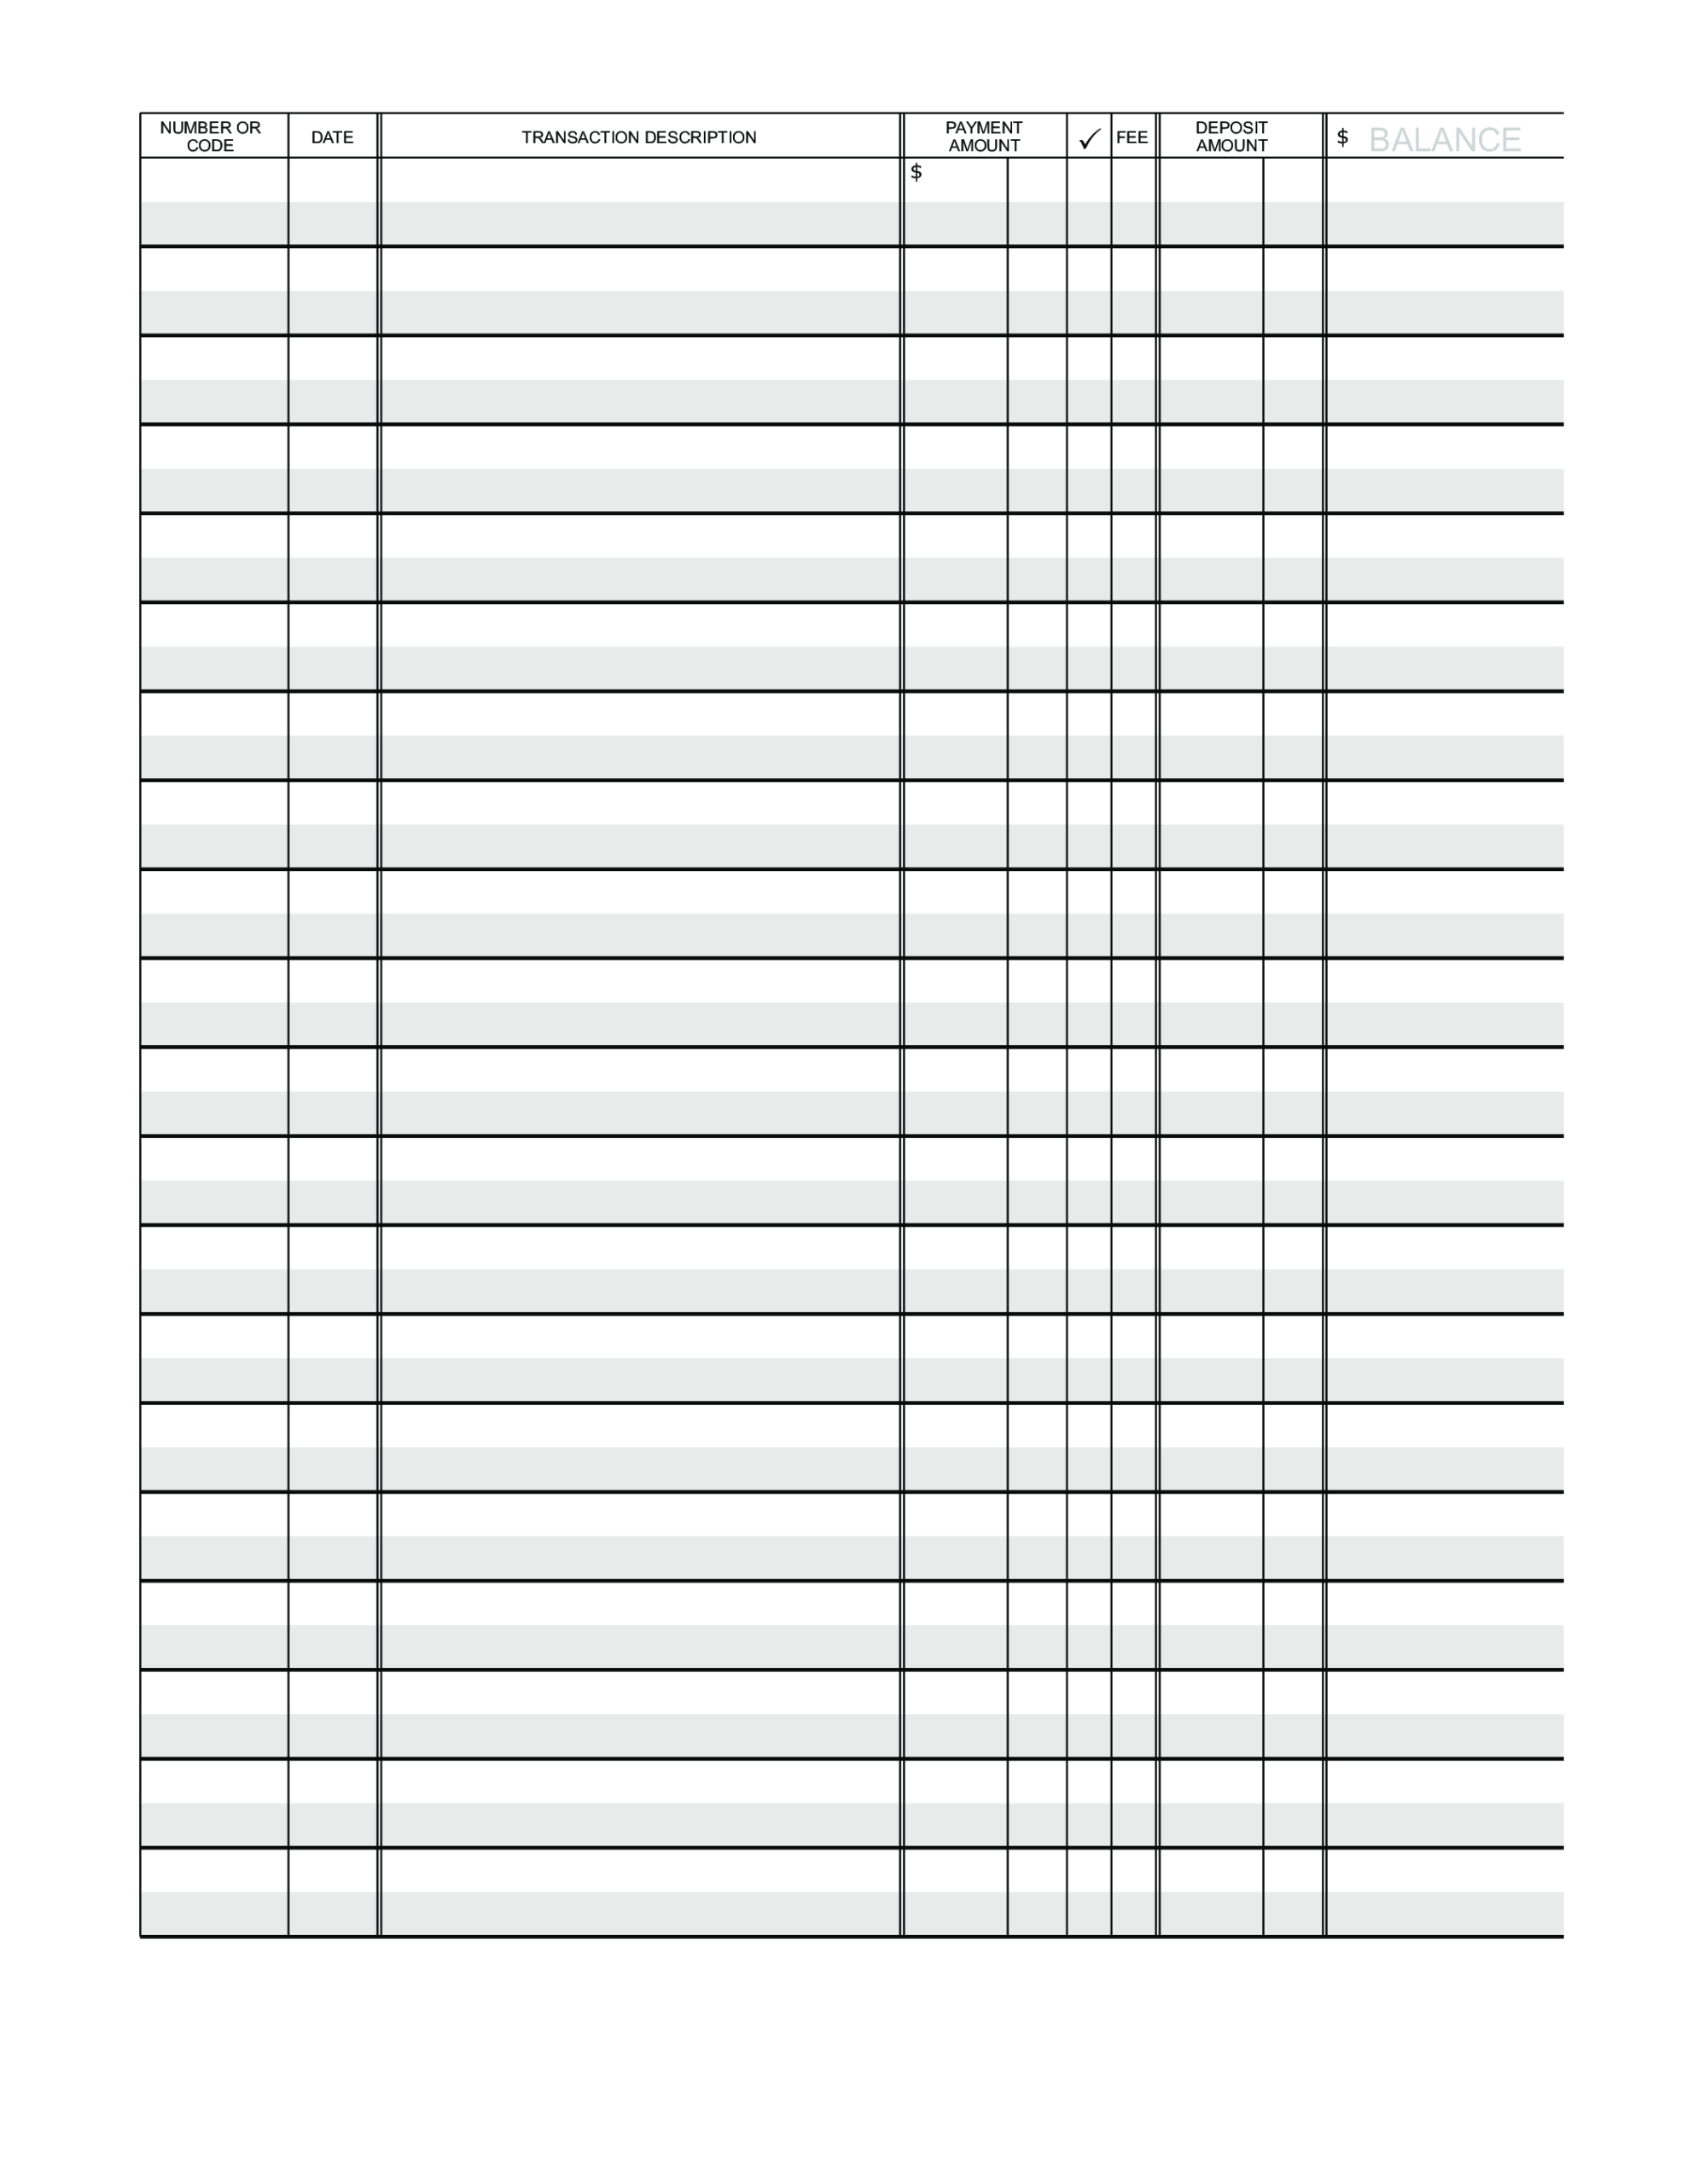 Blank Ledger Paper | Templates At Allbusinesstemplates Throughout Blank Ledger Template